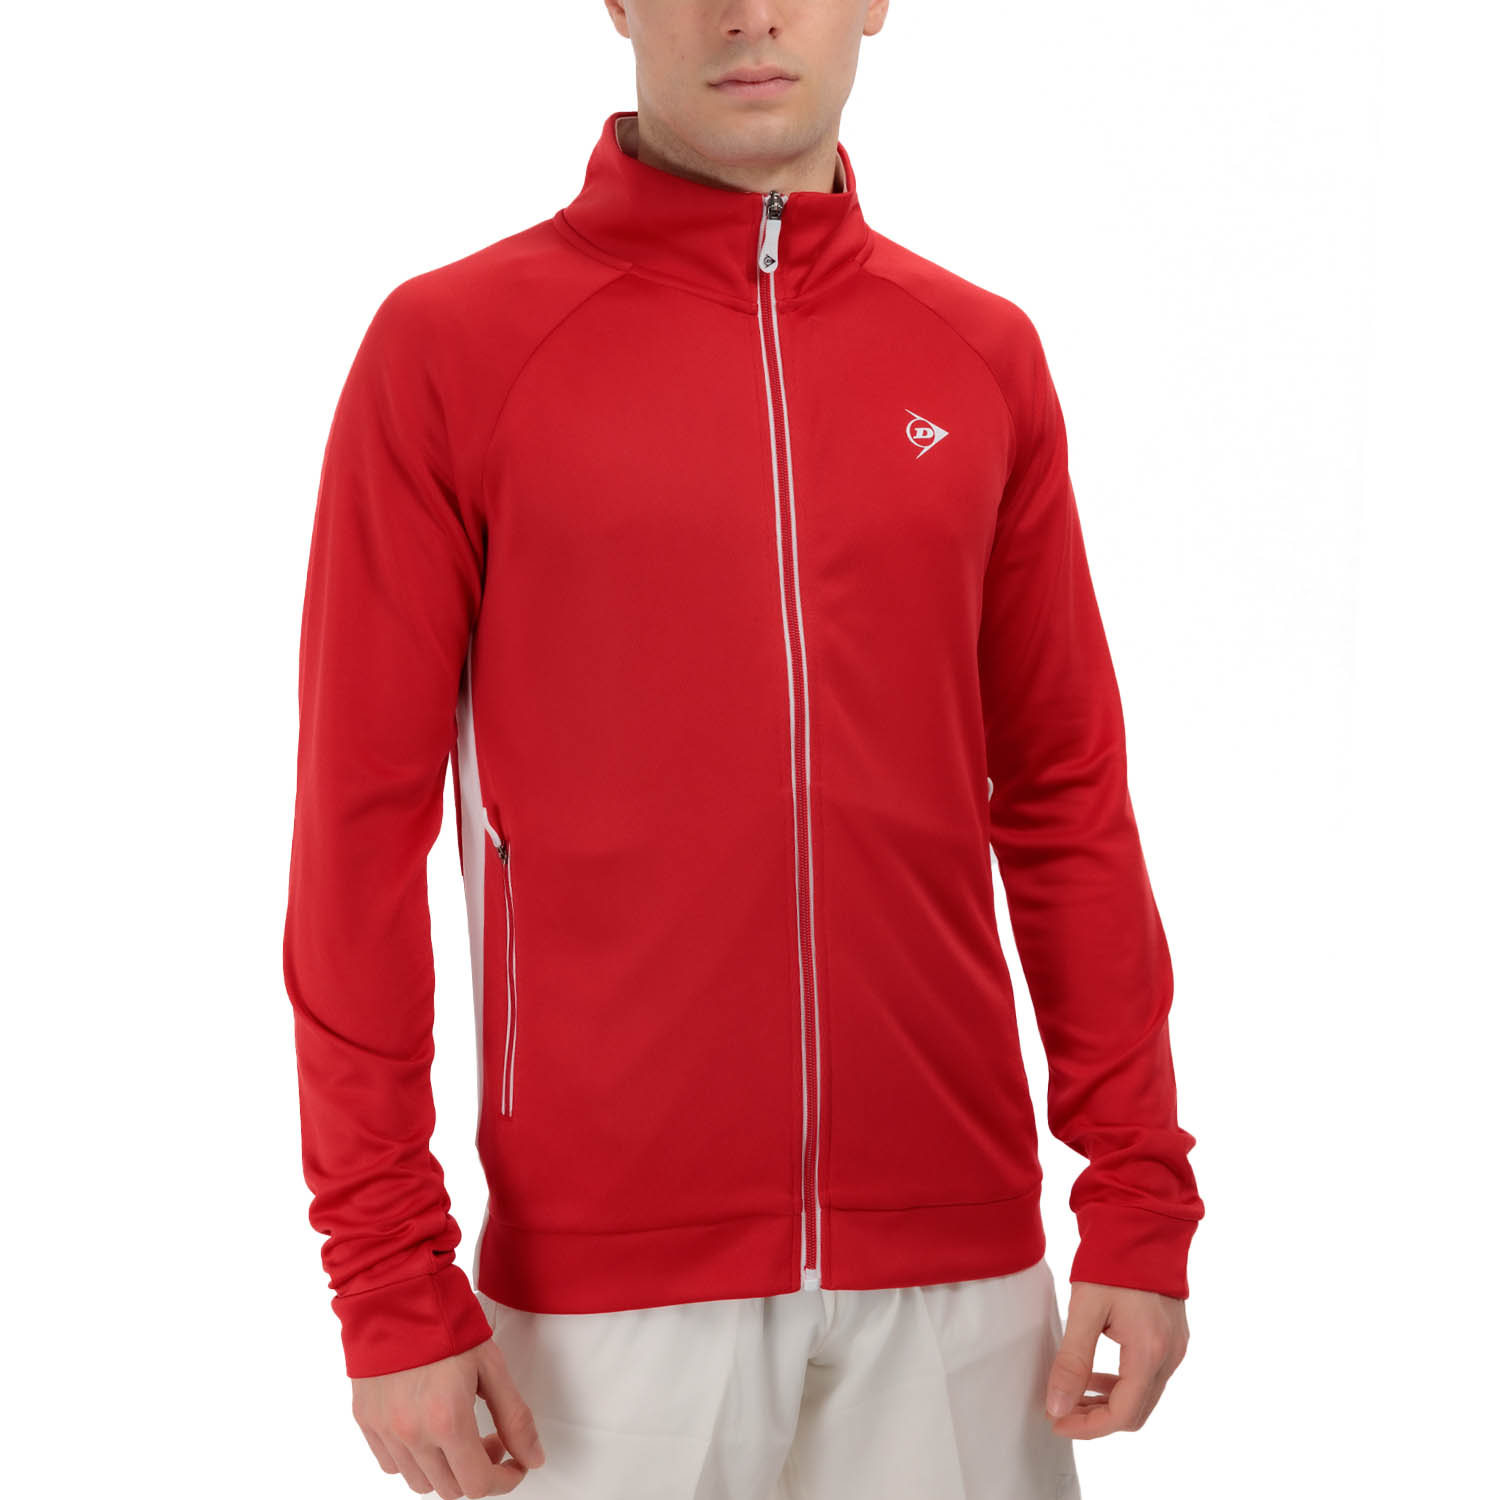 Dunlop Club Knitted Jacket - Red/White